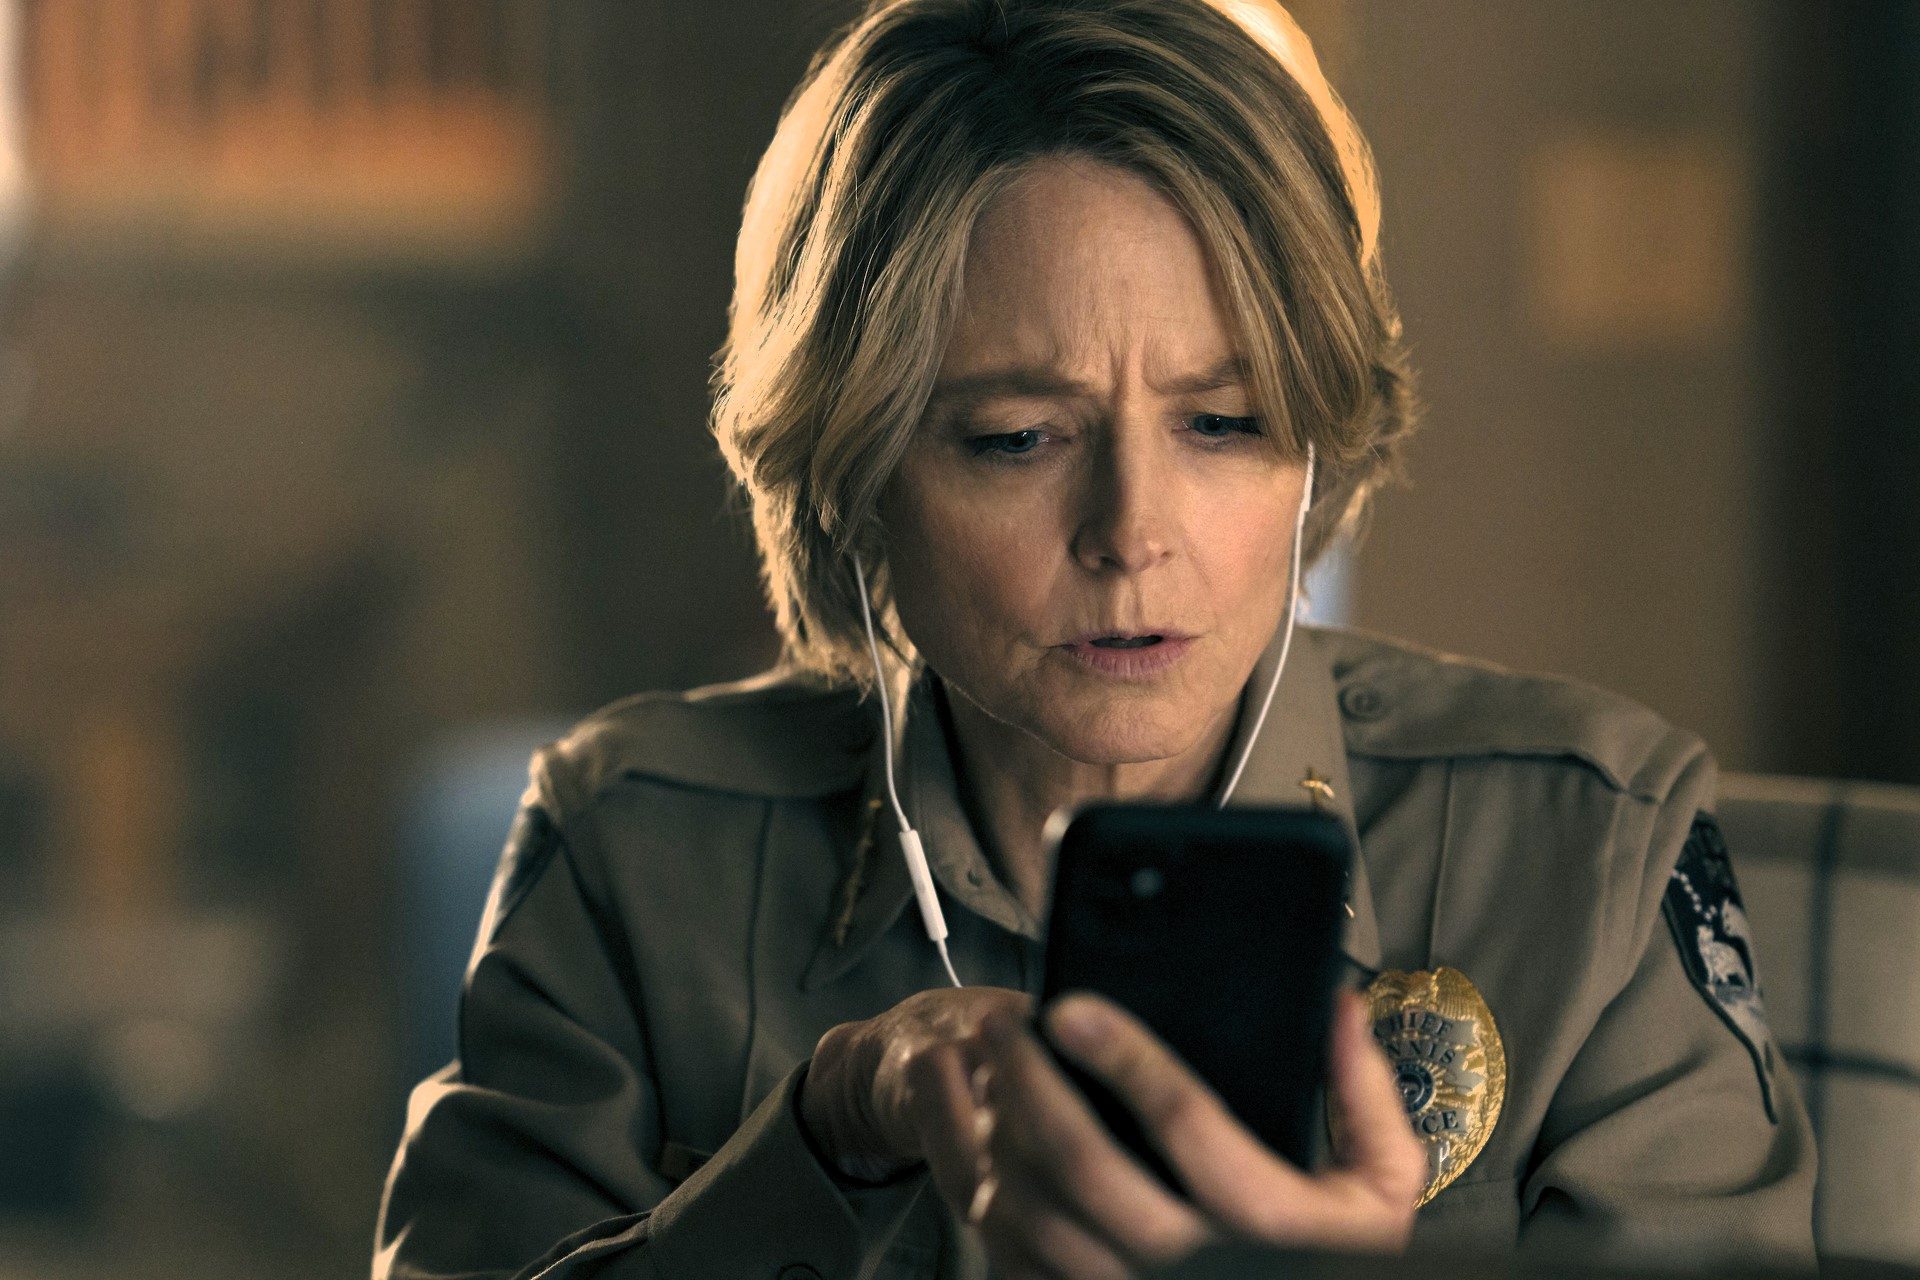 [Only IN Hollywood] Jodie Foster on ‘True Detective: Night Country’ – her 1st TV show in almost 50 years